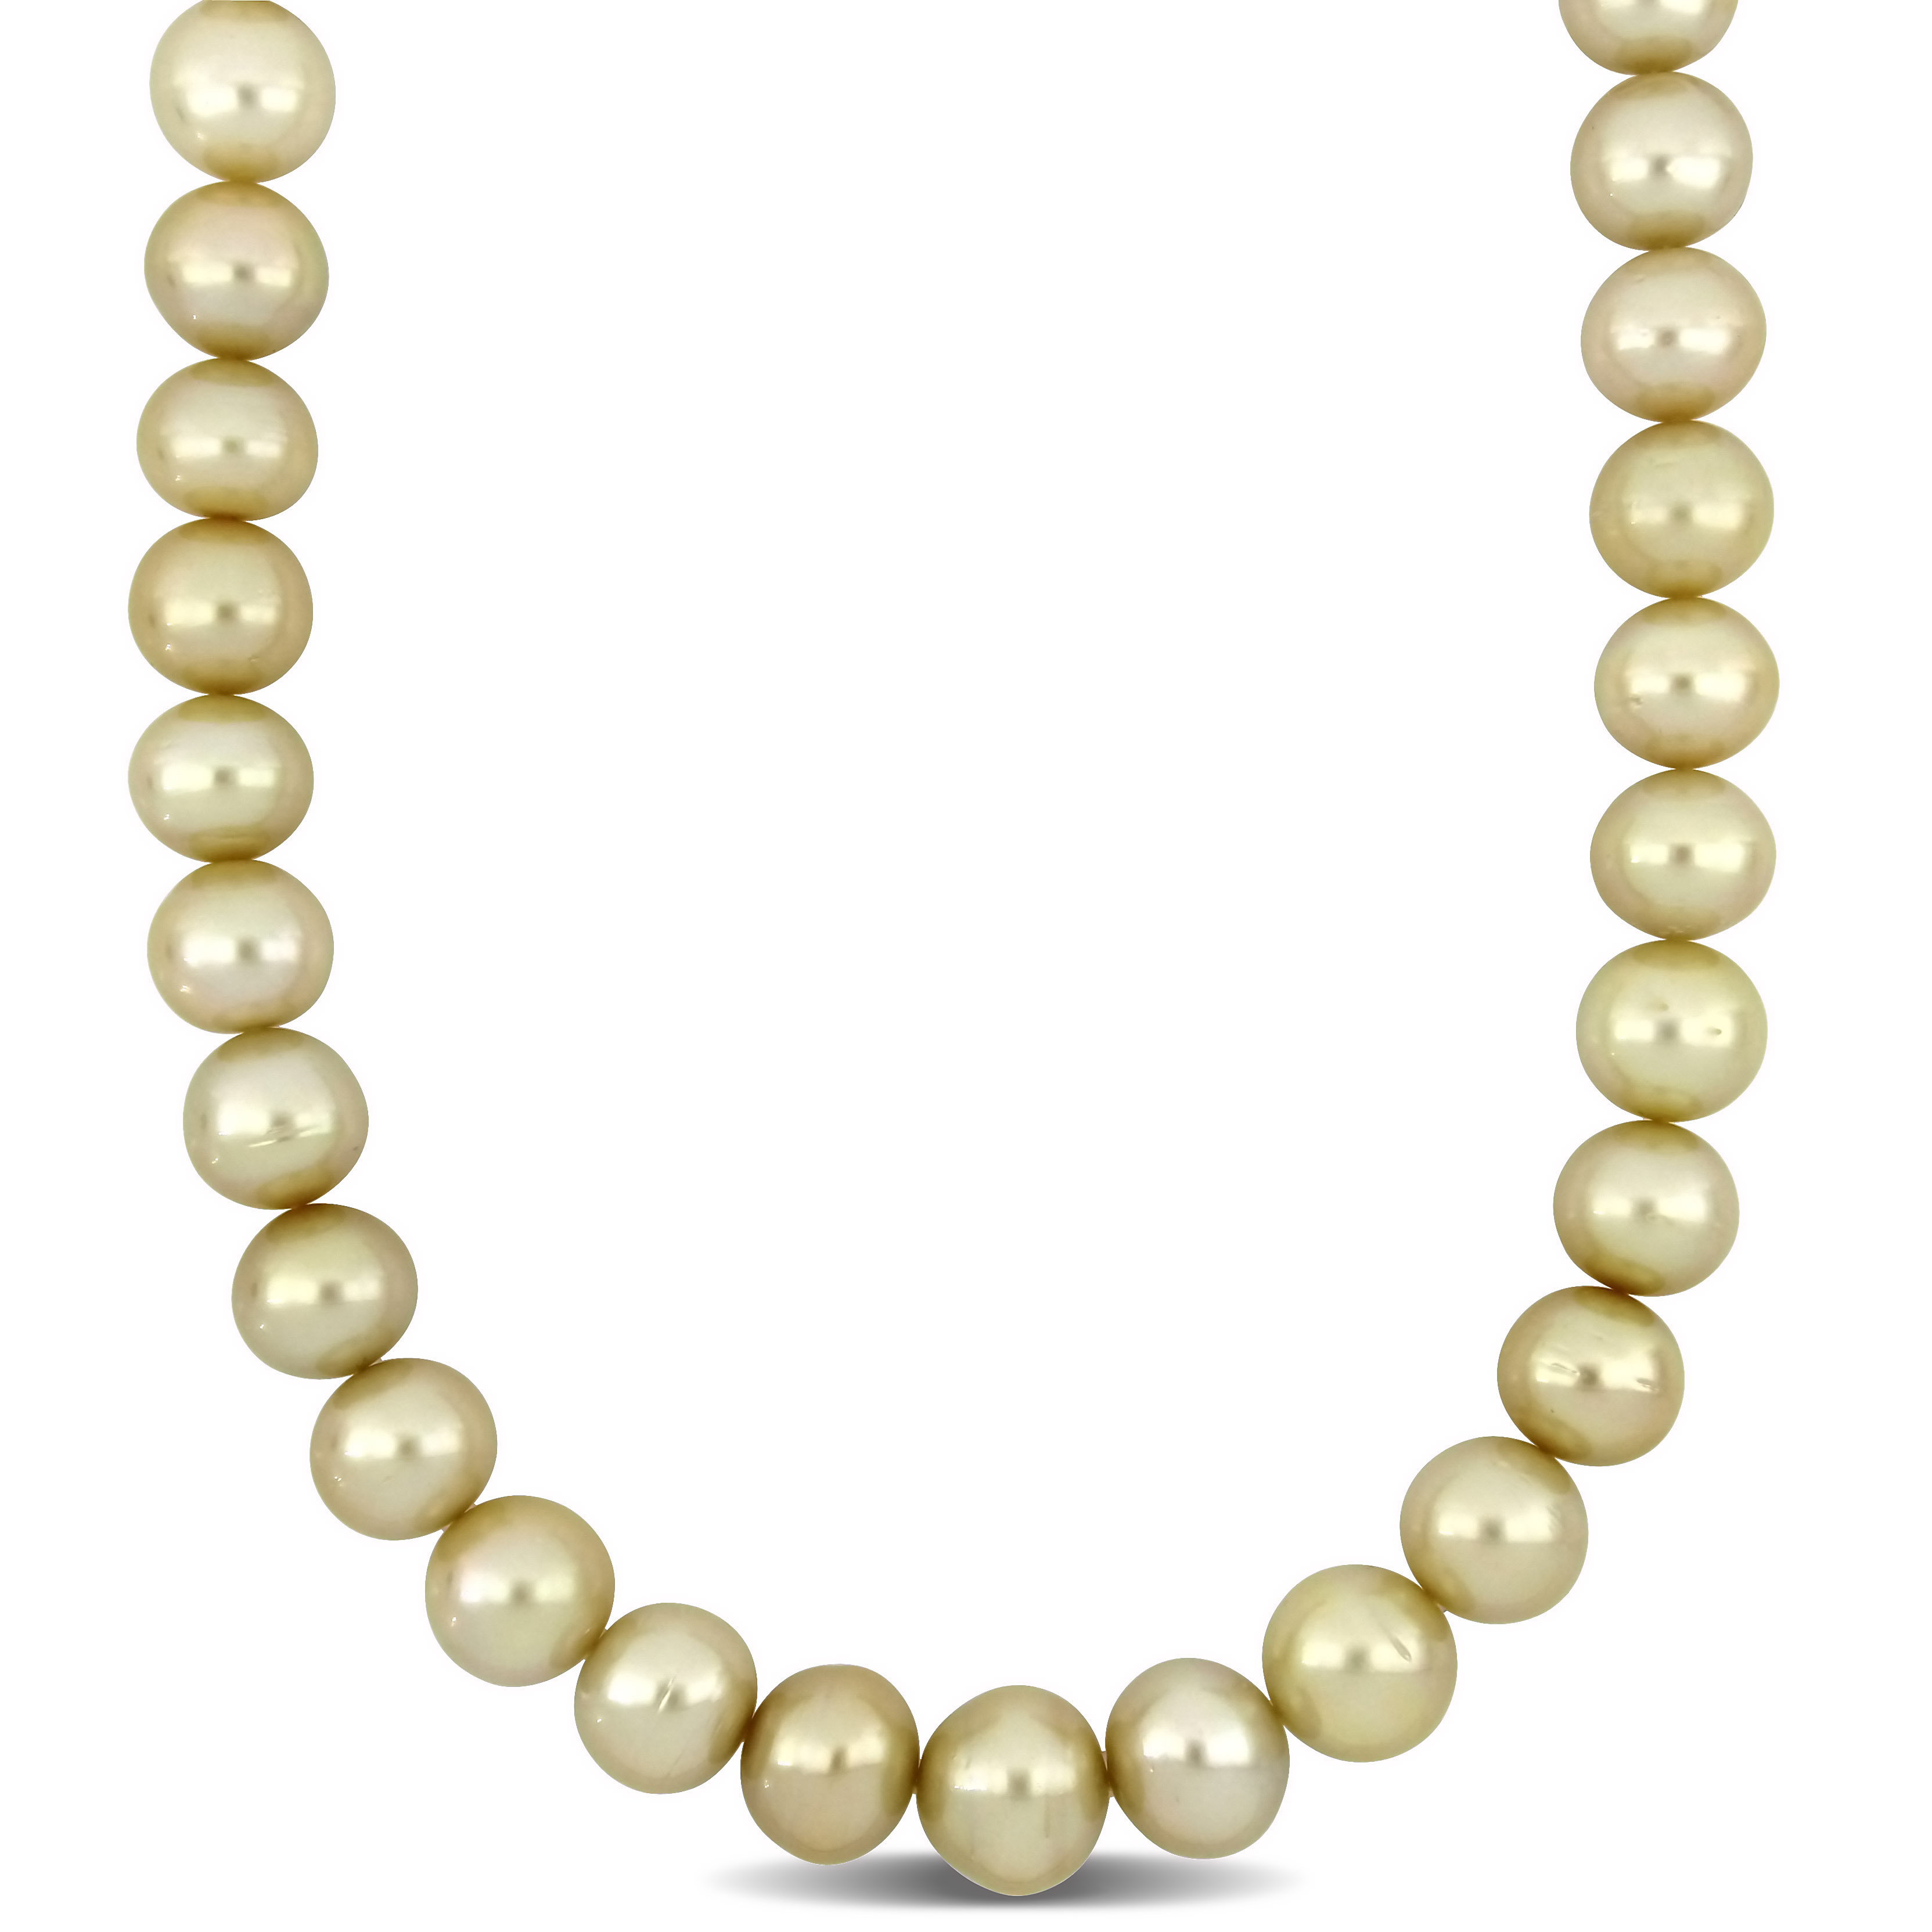 13-15 MM Golden South Sea Cultured Pearl Graduated Necklace in 14k Yellow Gold - 18 in